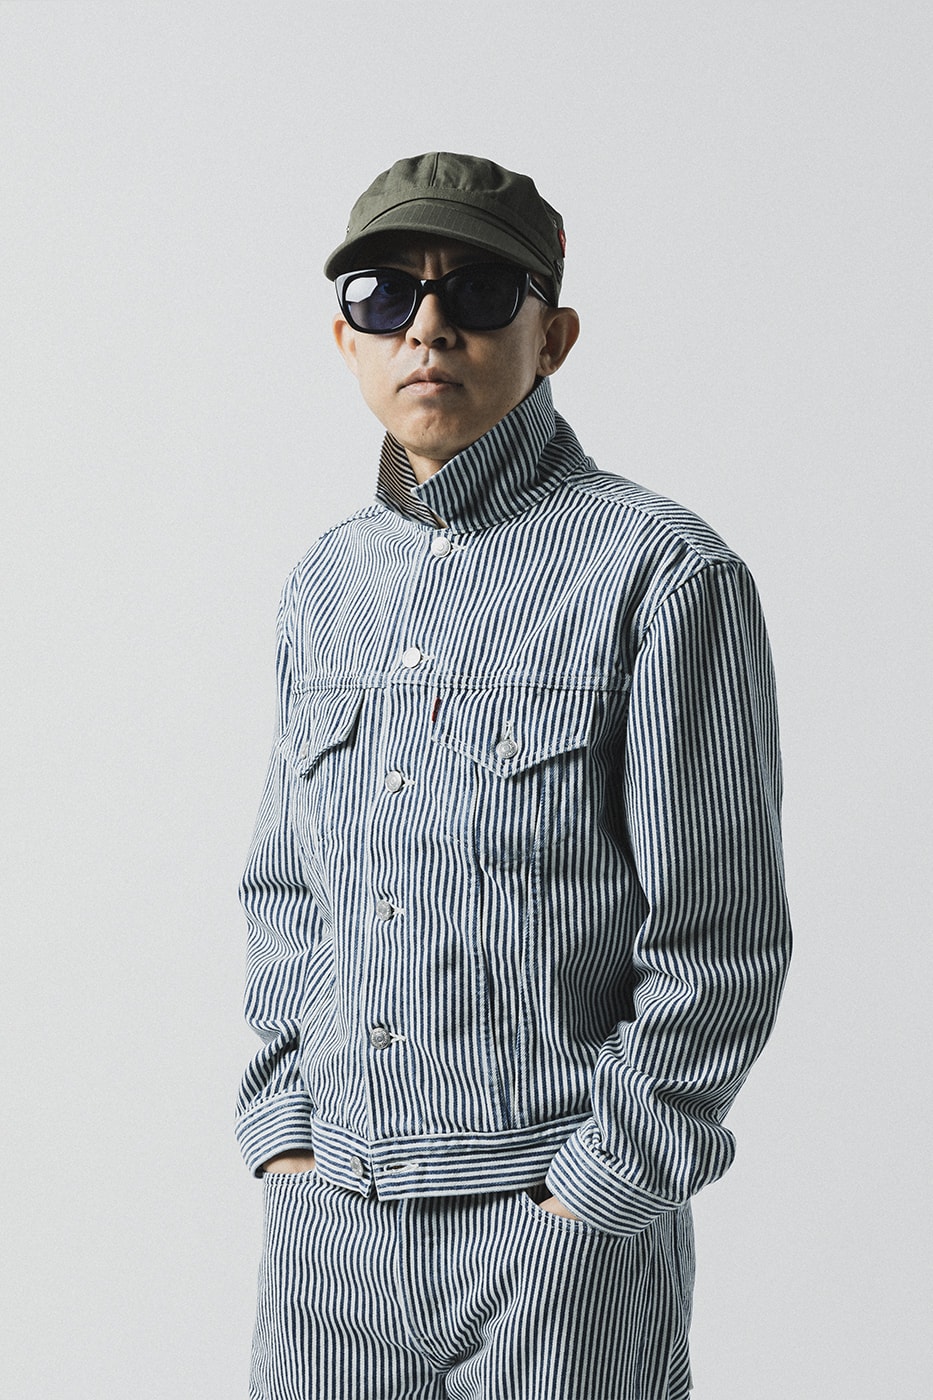 Levi's® x HUMAN MADE by NIGO release their 2nd collaboration feat